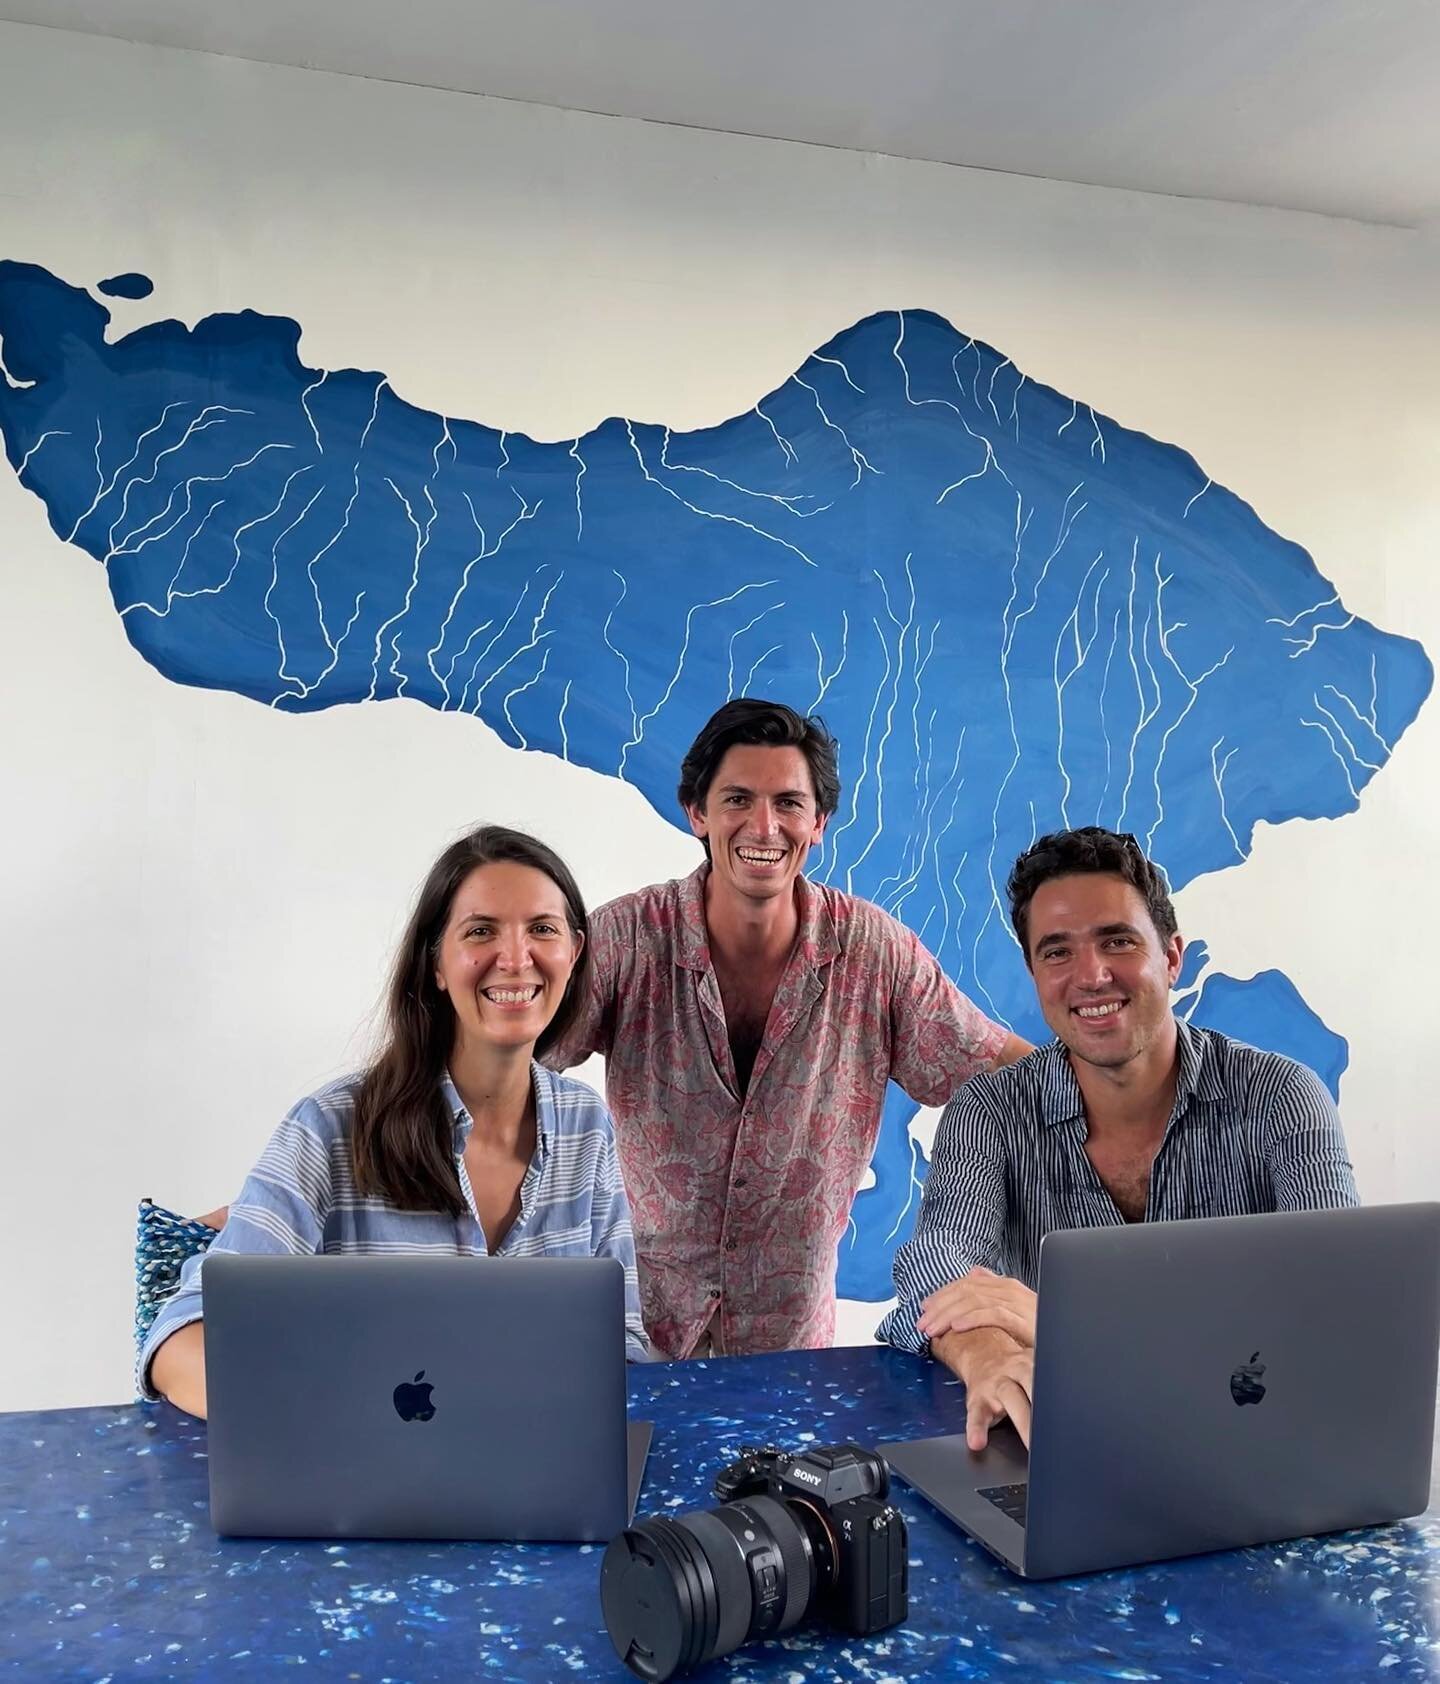 We&rsquo;ve been busy spending the last couple of weeks strategizing our @sungaiwatch expansion to 1,000 barriers and we&rsquo;re so excited to be bringing our work of cleaning rivers outside of Bali.

Stay tuned for some more @makeachange.world cont